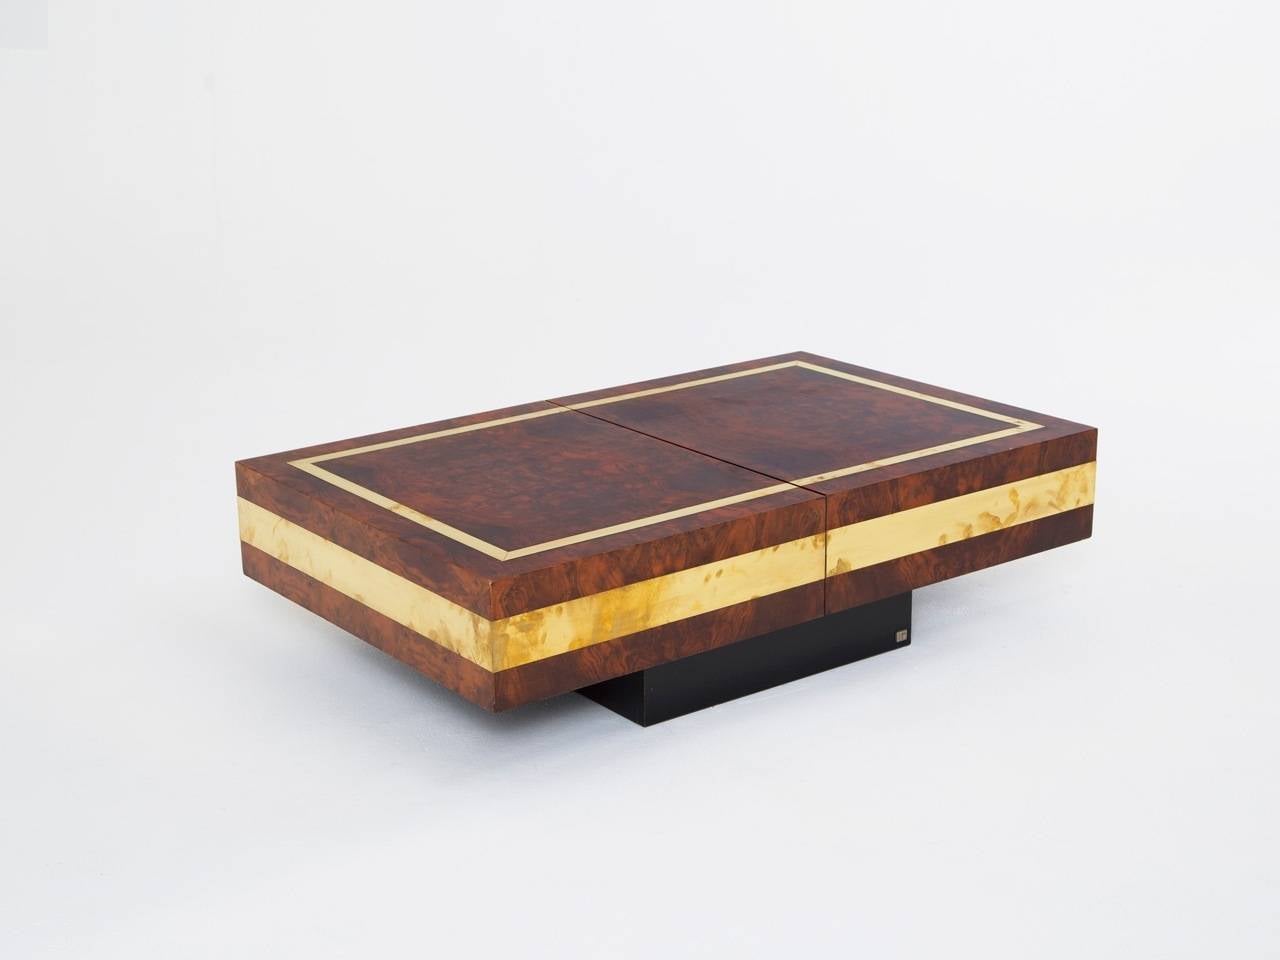 Coffee table designed by Jean Claude Mahey, burl and brass, France, 1970s.

The cherry burl wood has a very warm expression and especially in combination with the solid brass detailing in the top and on the sides of the table, it has a very